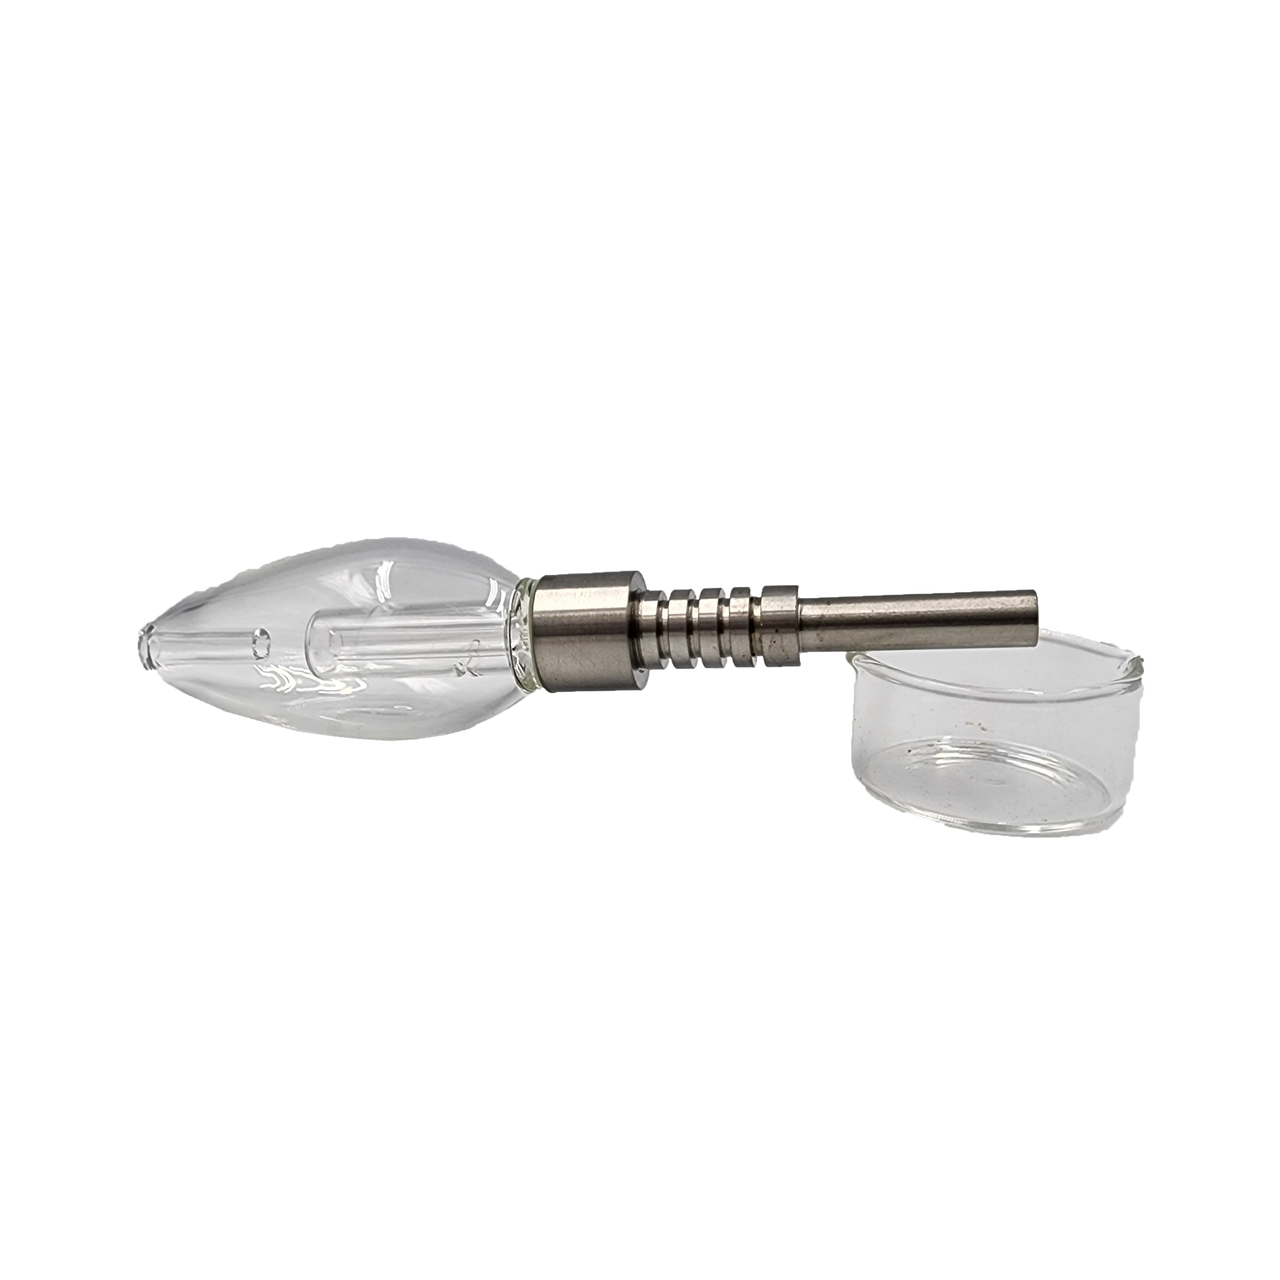 https://cdn11.bigcommerce.com/s-ijm7dw7yvr/images/stencil/1280x1280/products/3310/8714/LuvBuds-NC-SPILLXKIT-Spill_Proof_Bubbler_Nectar_Collector_Kit_Titanium_Screw_Tip___27447.1692650180.png?c=2